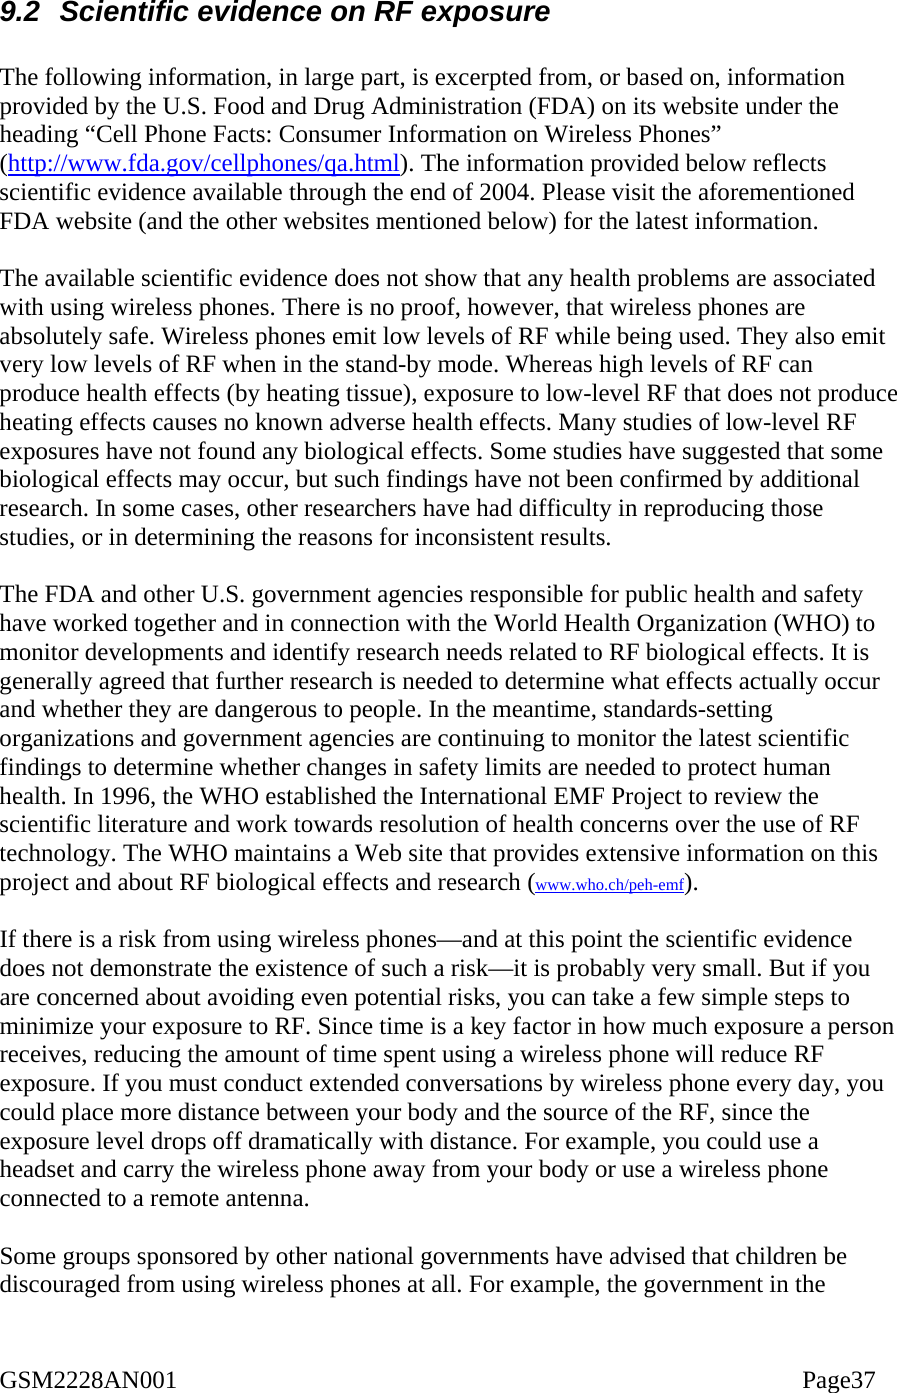  9.2  Scientific evidence on RF exposure  The following information, in large part, is excerpted from, or based on, information provided by the U.S. Food and Drug Administration (FDA) on its website under the heading “Cell Phone Facts: Consumer Information on Wireless Phones”  (http://www.fda.gov/cellphones/qa.html). The information provided below reflects scientific evidence available through the end of 2004. Please visit the aforementioned FDA website (and the other websites mentioned below) for the latest information.  The available scientific evidence does not show that any health problems are associated with using wireless phones. There is no proof, however, that wireless phones are absolutely safe. Wireless phones emit low levels of RF while being used. They also emit very low levels of RF when in the stand-by mode. Whereas high levels of RF can produce health effects (by heating tissue), exposure to low-level RF that does not produce heating effects causes no known adverse health effects. Many studies of low-level RF exposures have not found any biological effects. Some studies have suggested that some biological effects may occur, but such findings have not been confirmed by additional research. In some cases, other researchers have had difficulty in reproducing those studies, or in determining the reasons for inconsistent results.  The FDA and other U.S. government agencies responsible for public health and safety have worked together and in connection with the World Health Organization (WHO) to monitor developments and identify research needs related to RF biological effects. It is generally agreed that further research is needed to determine what effects actually occur and whether they are dangerous to people. In the meantime, standards-setting organizations and government agencies are continuing to monitor the latest scientific findings to determine whether changes in safety limits are needed to protect human health. In 1996, the WHO established the International EMF Project to review the scientific literature and work towards resolution of health concerns over the use of RF technology. The WHO maintains a Web site that provides extensive information on this project and about RF biological effects and research (www.who.ch/peh-emf).  If there is a risk from using wireless phones—and at this point the scientific evidence does not demonstrate the existence of such a risk—it is probably very small. But if you are concerned about avoiding even potential risks, you can take a few simple steps to minimize your exposure to RF. Since time is a key factor in how much exposure a person receives, reducing the amount of time spent using a wireless phone will reduce RF exposure. If you must conduct extended conversations by wireless phone every day, you could place more distance between your body and the source of the RF, since the exposure level drops off dramatically with distance. For example, you could use a headset and carry the wireless phone away from your body or use a wireless phone connected to a remote antenna.  Some groups sponsored by other national governments have advised that children be discouraged from using wireless phones at all. For example, the government in the GSM2228AN001                                                                                                    Page37 